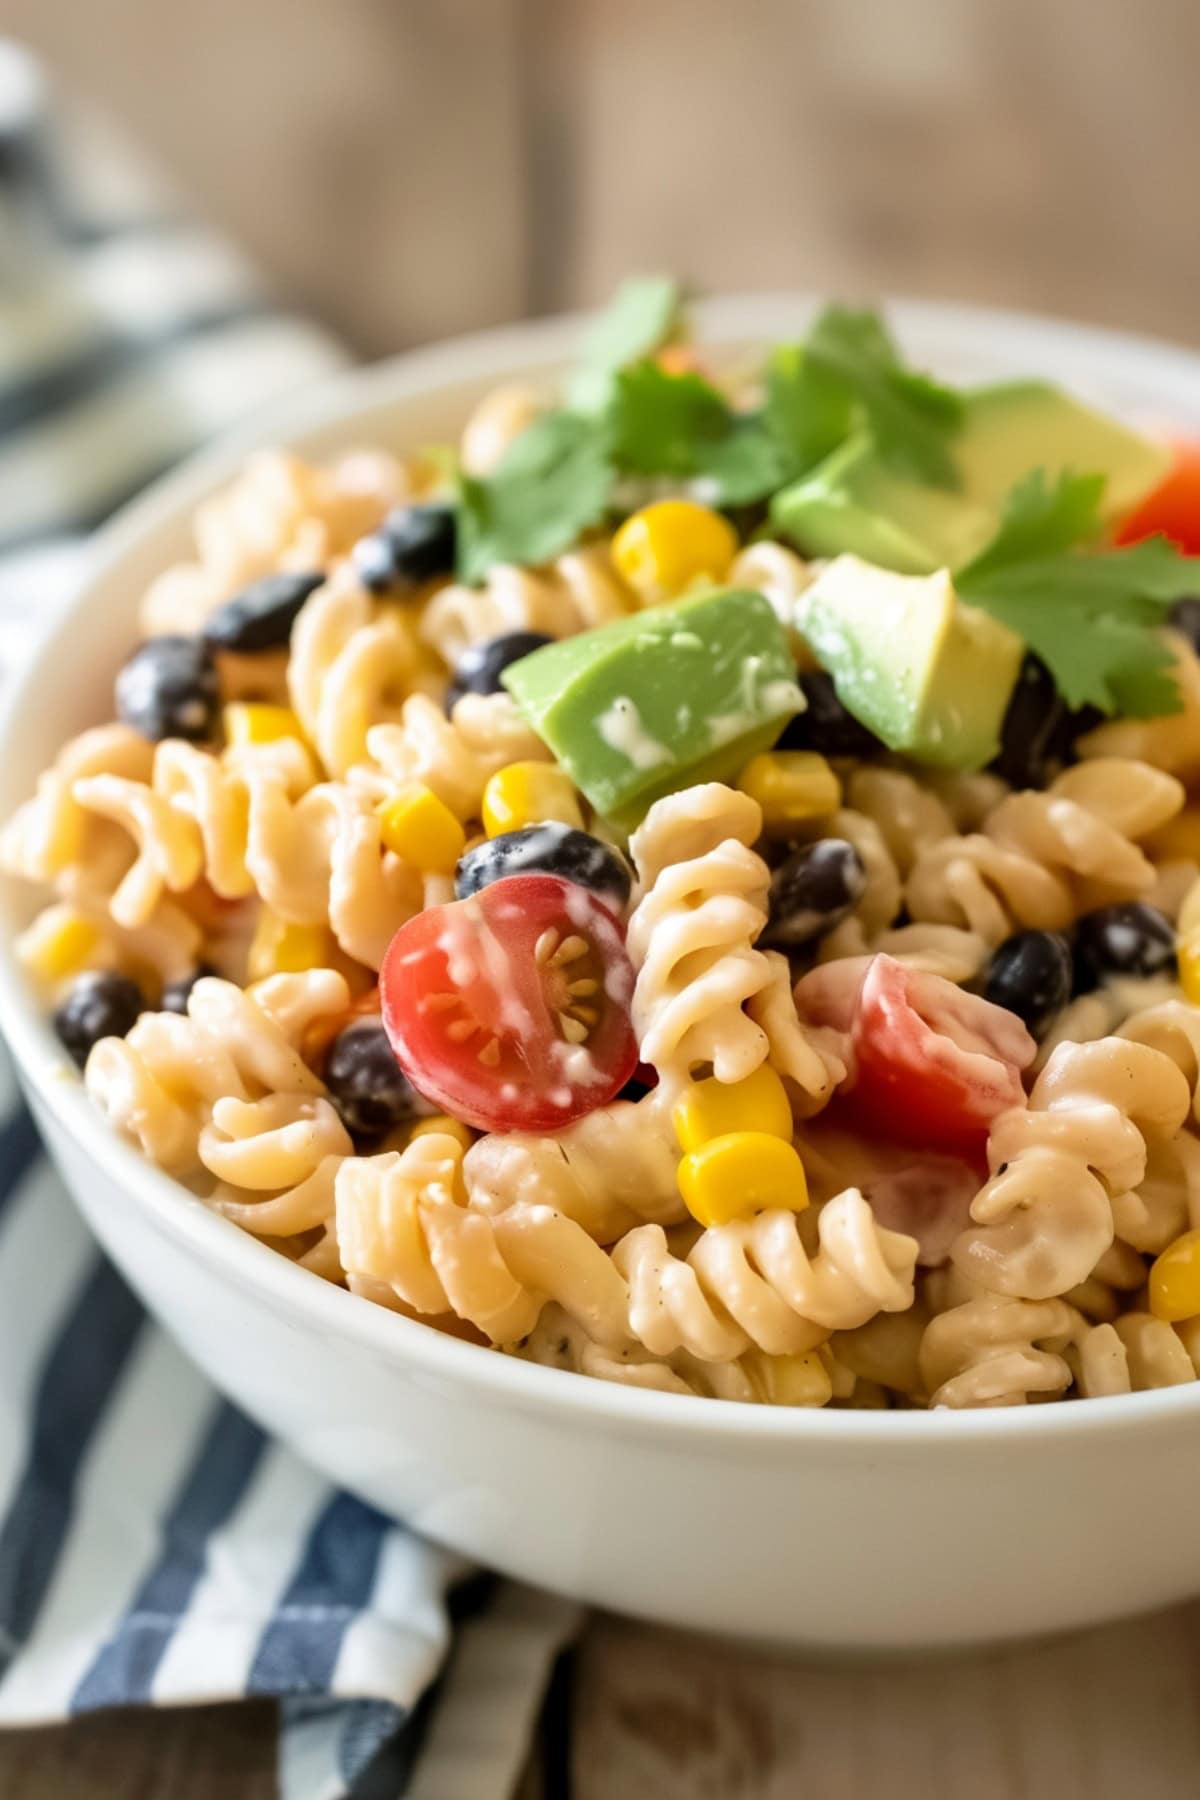 A heaping serving of Tex-Mex pasta salad in a bowl, showing off the mix of cherry tomatoes, black beans, and corn kernels.